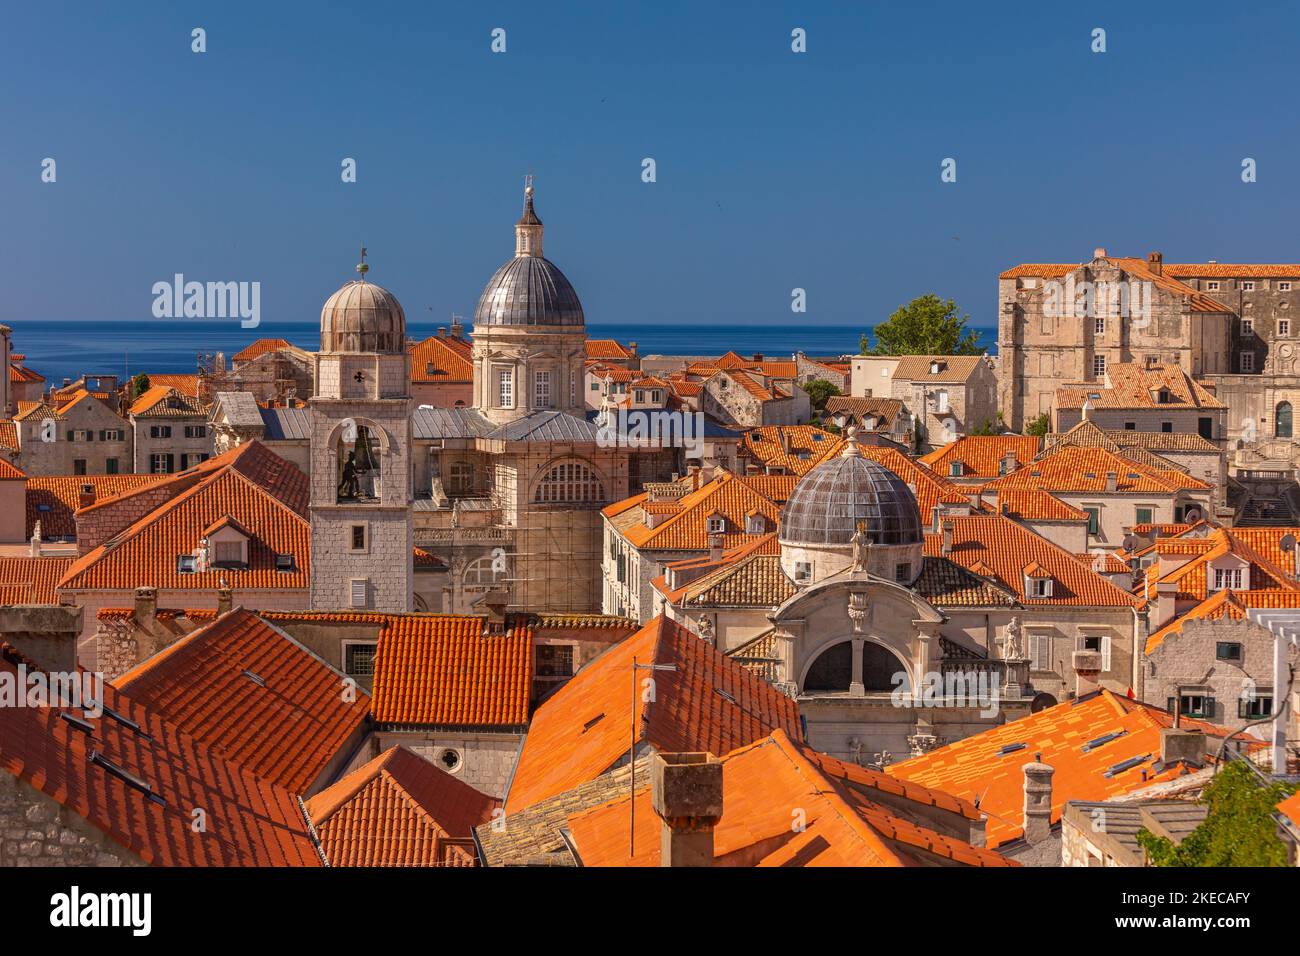 DUBROVNIK, CROATIA, EUROPE - Dubrovnik Cathedral, center, in the walled fortress city of Dubrovnik on the Dalmation coast. Stock Photo